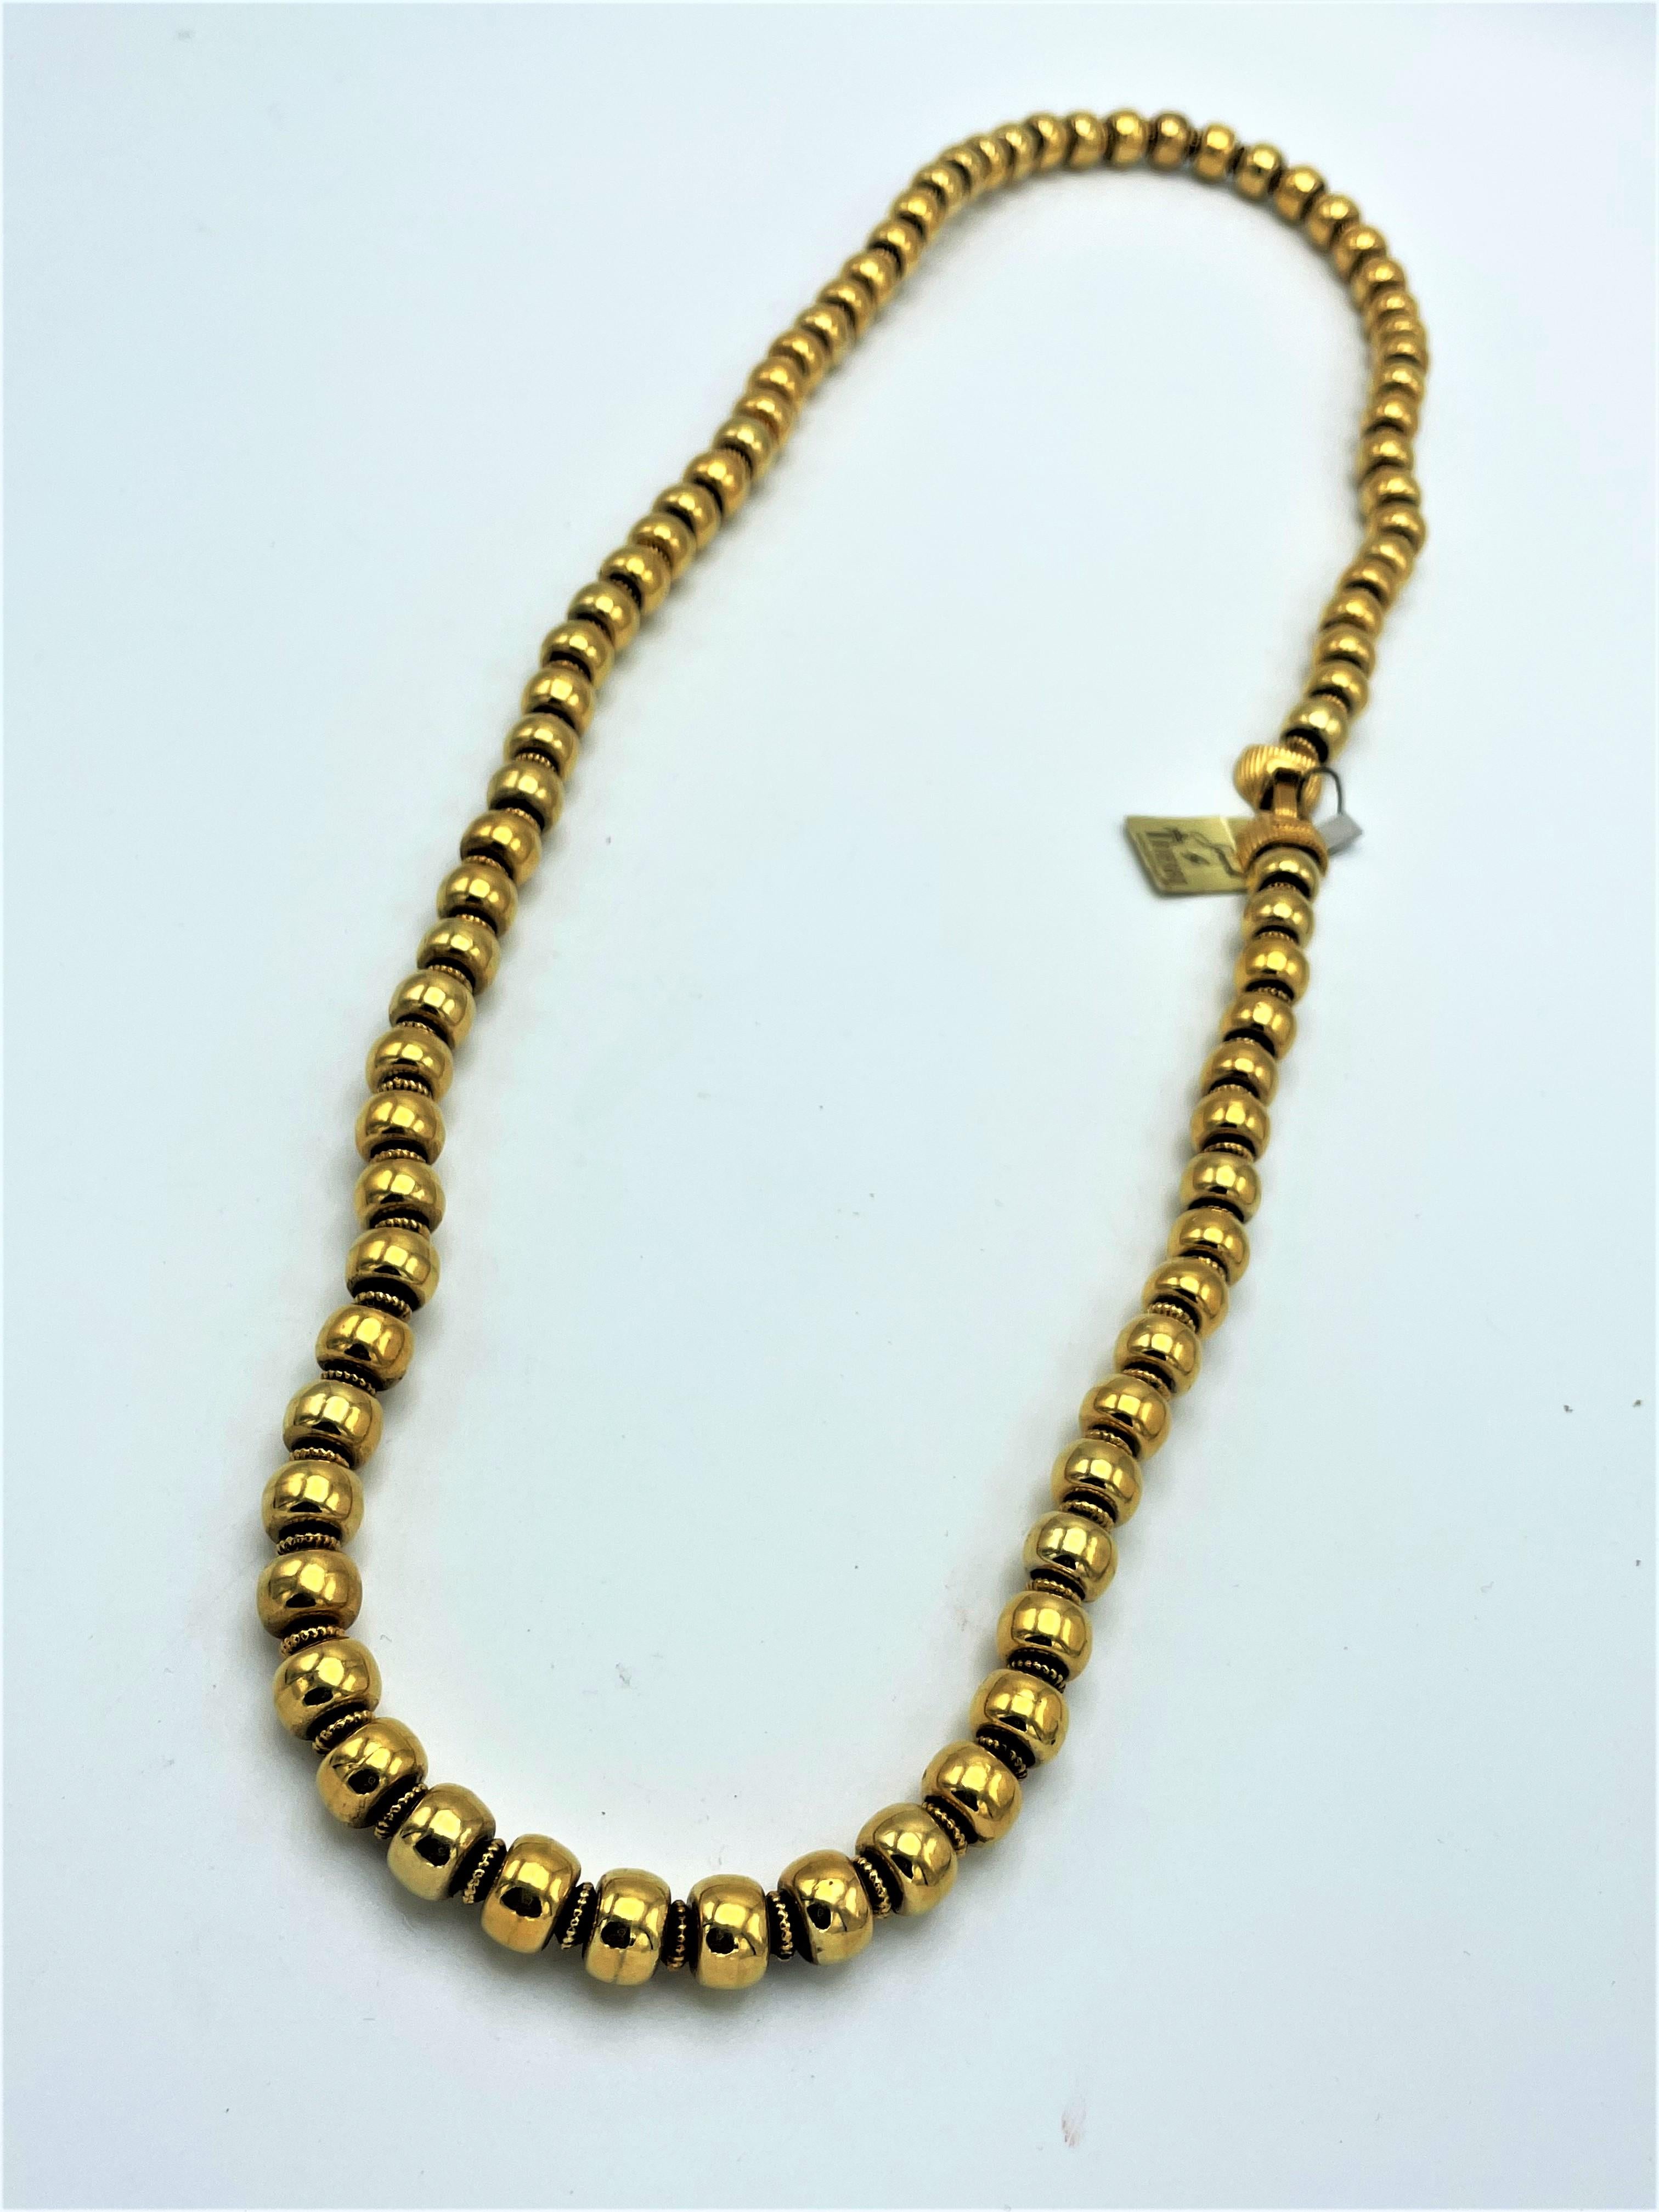 Vintage long necklace 'Jewel by TRIFARI' tag,  never worn, gold plated, 1950s US 1